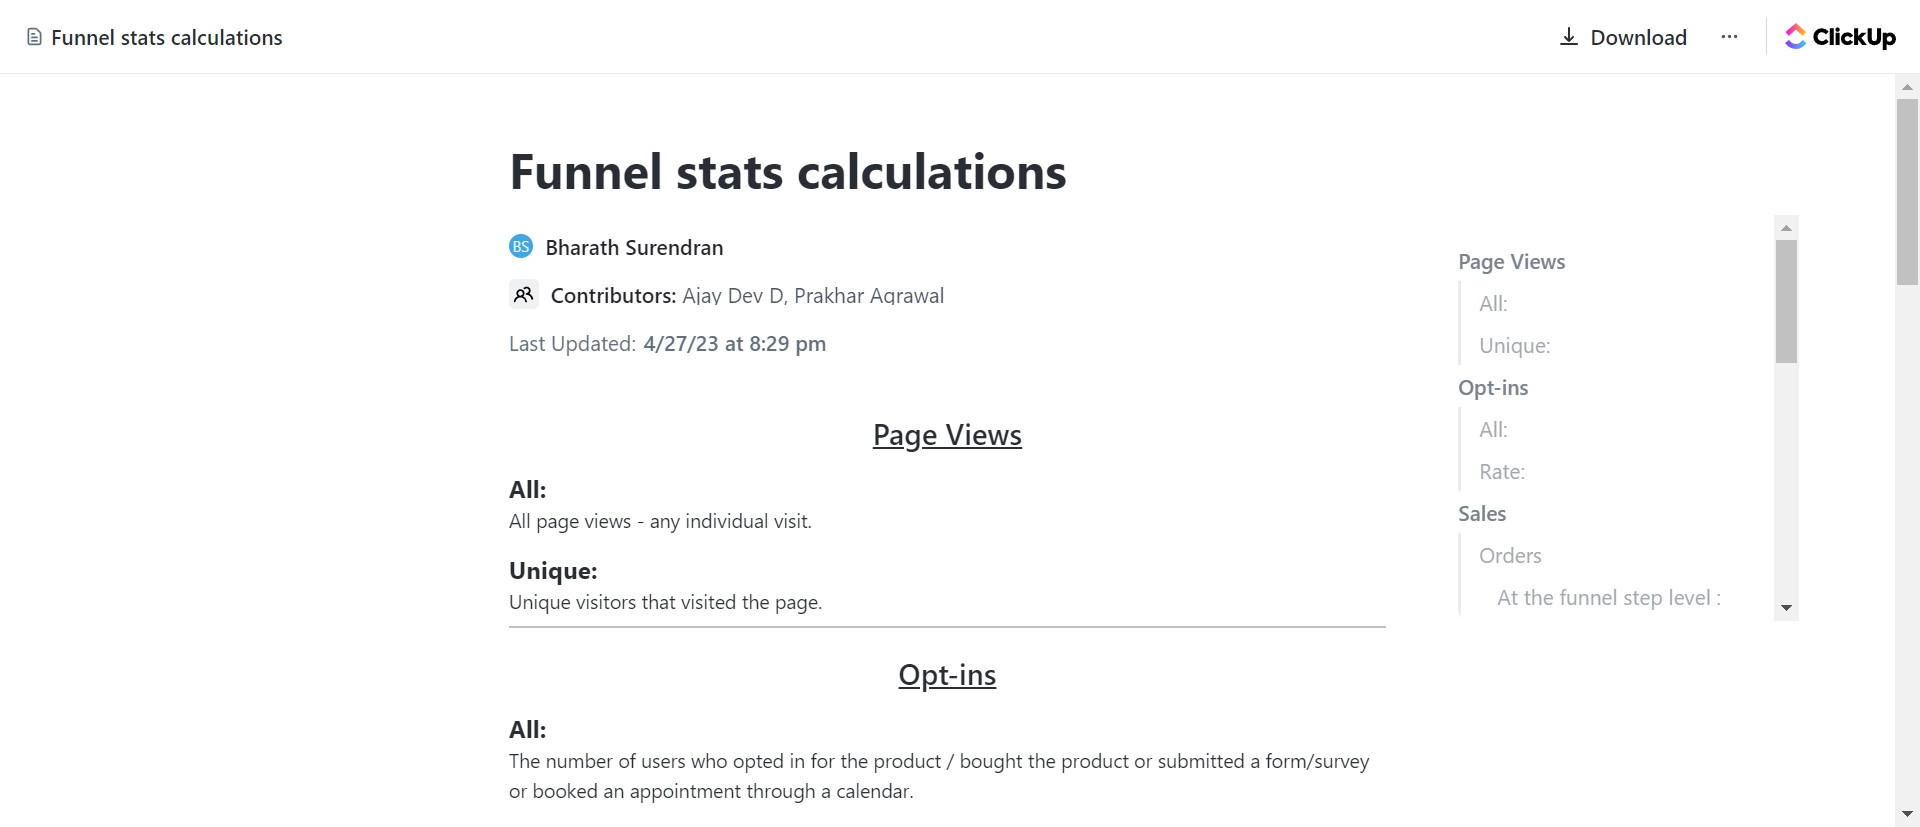 15 After that, click on "Funnel stats calculations".